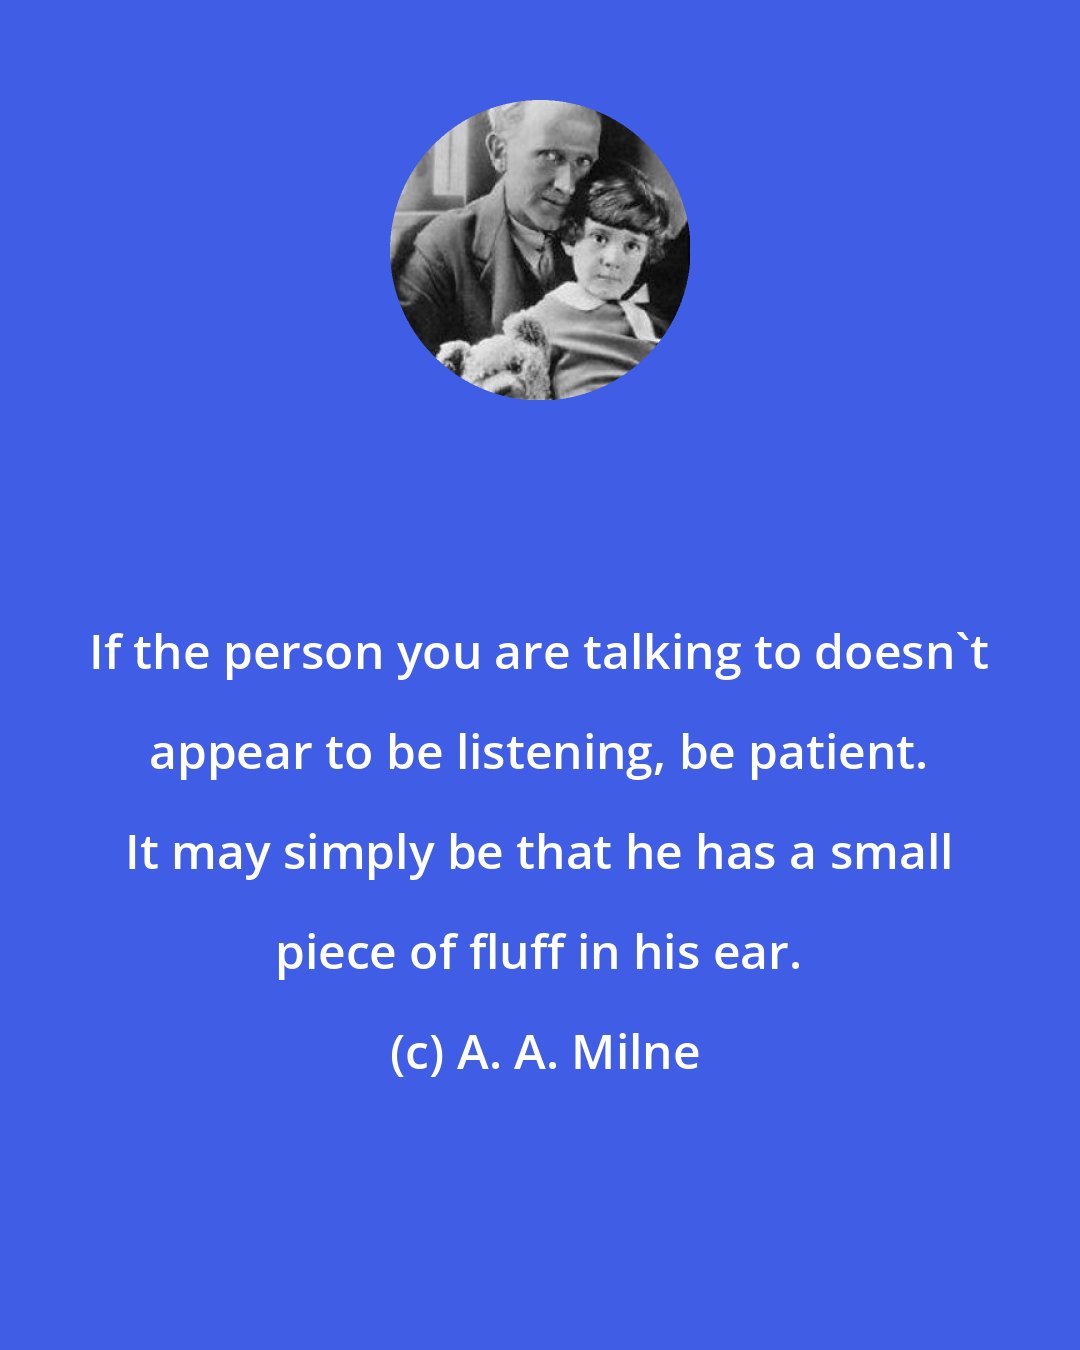 A. A. Milne: If the person you are talking to doesn't appear to be listening, be patient. It may simply be that he has a small piece of fluff in his ear.